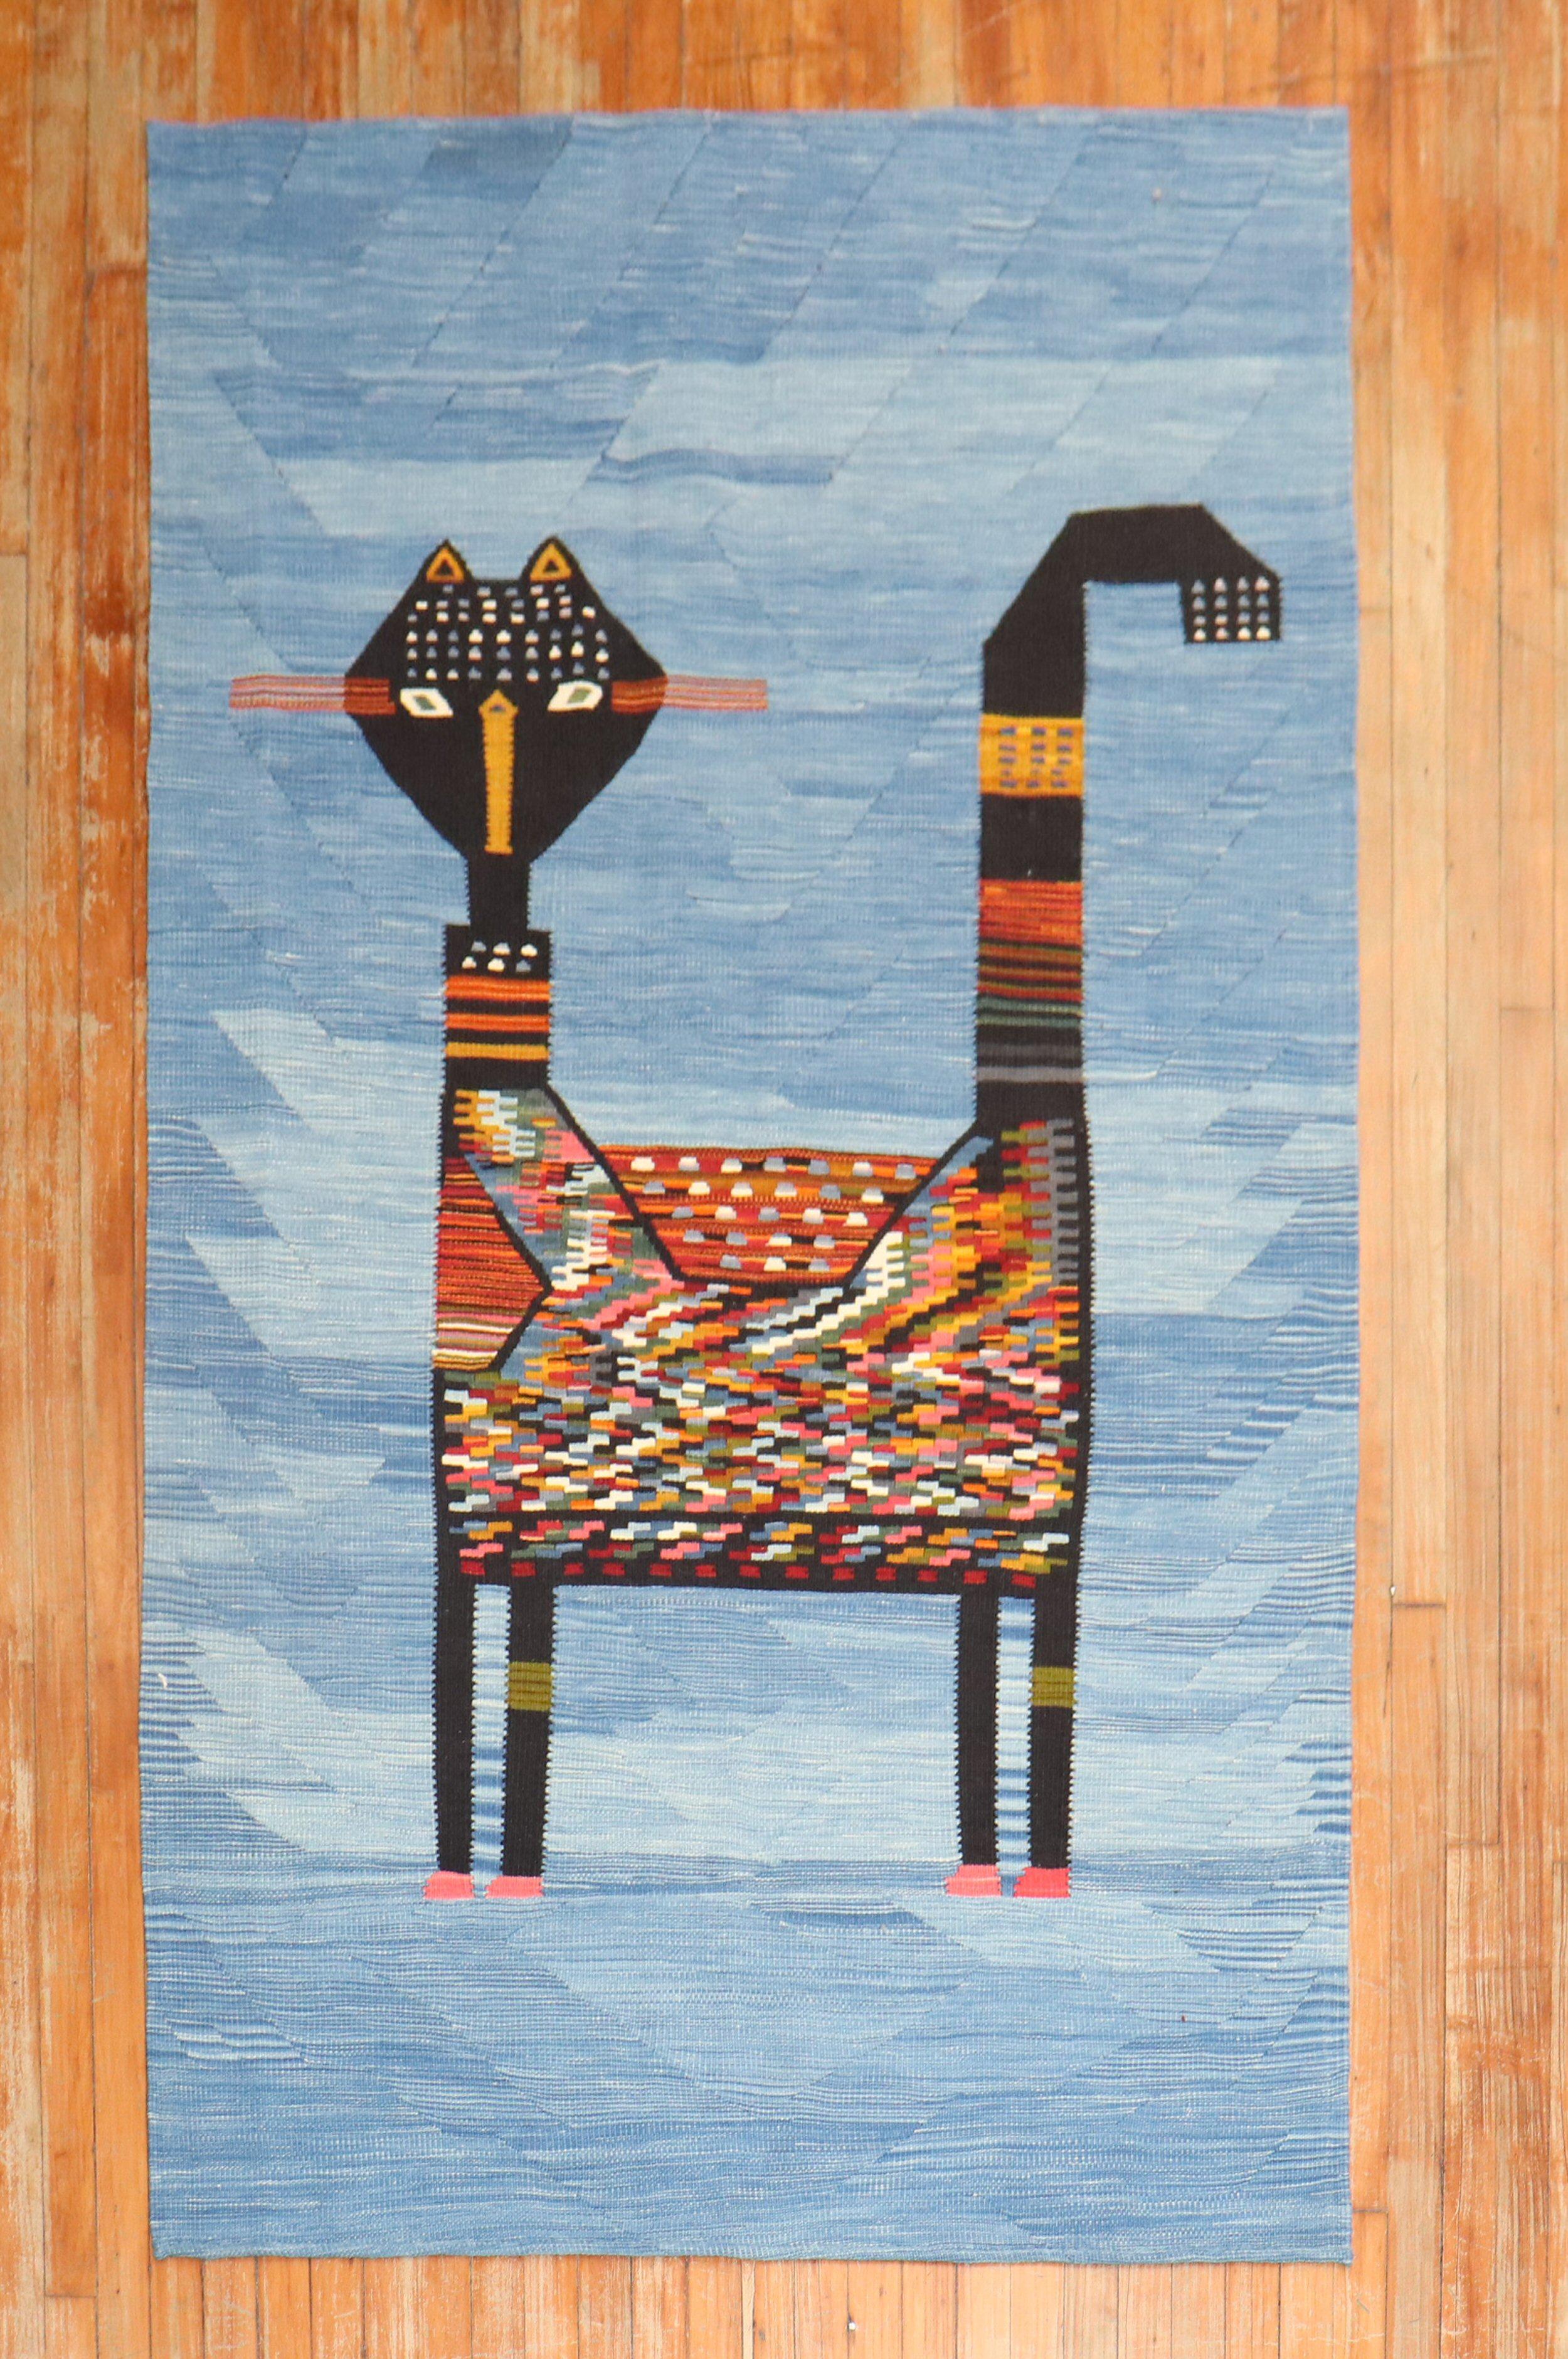 Intermediate-size Persian Kilim from the late 20th century with a large mischievous cat on a light blue field
This was originally belonging to a private Persian collector who requested to make a custom collection of flat-weaves with quirky themes